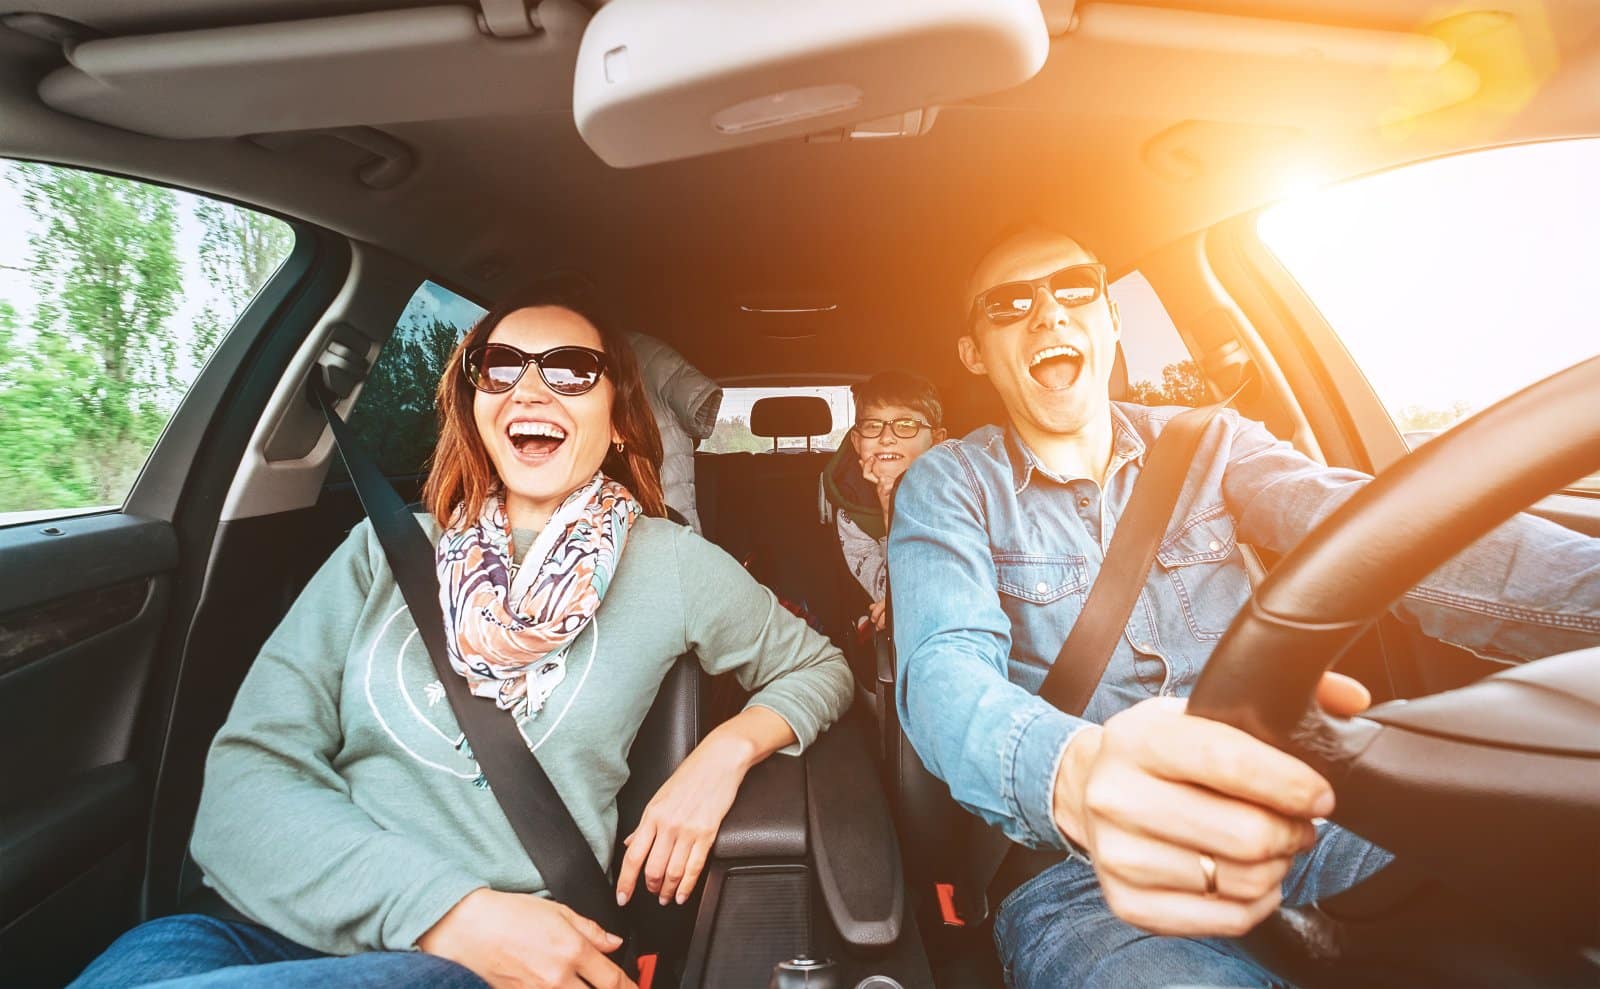 Image Credit: Shutterstock / Soloviova Liudmyla <p><span>Sharing laughter and a sense of humor could be incredibly bonding. If you feel loved when sharing moments of joy and laughter, this might be your primary love language.</span></p>